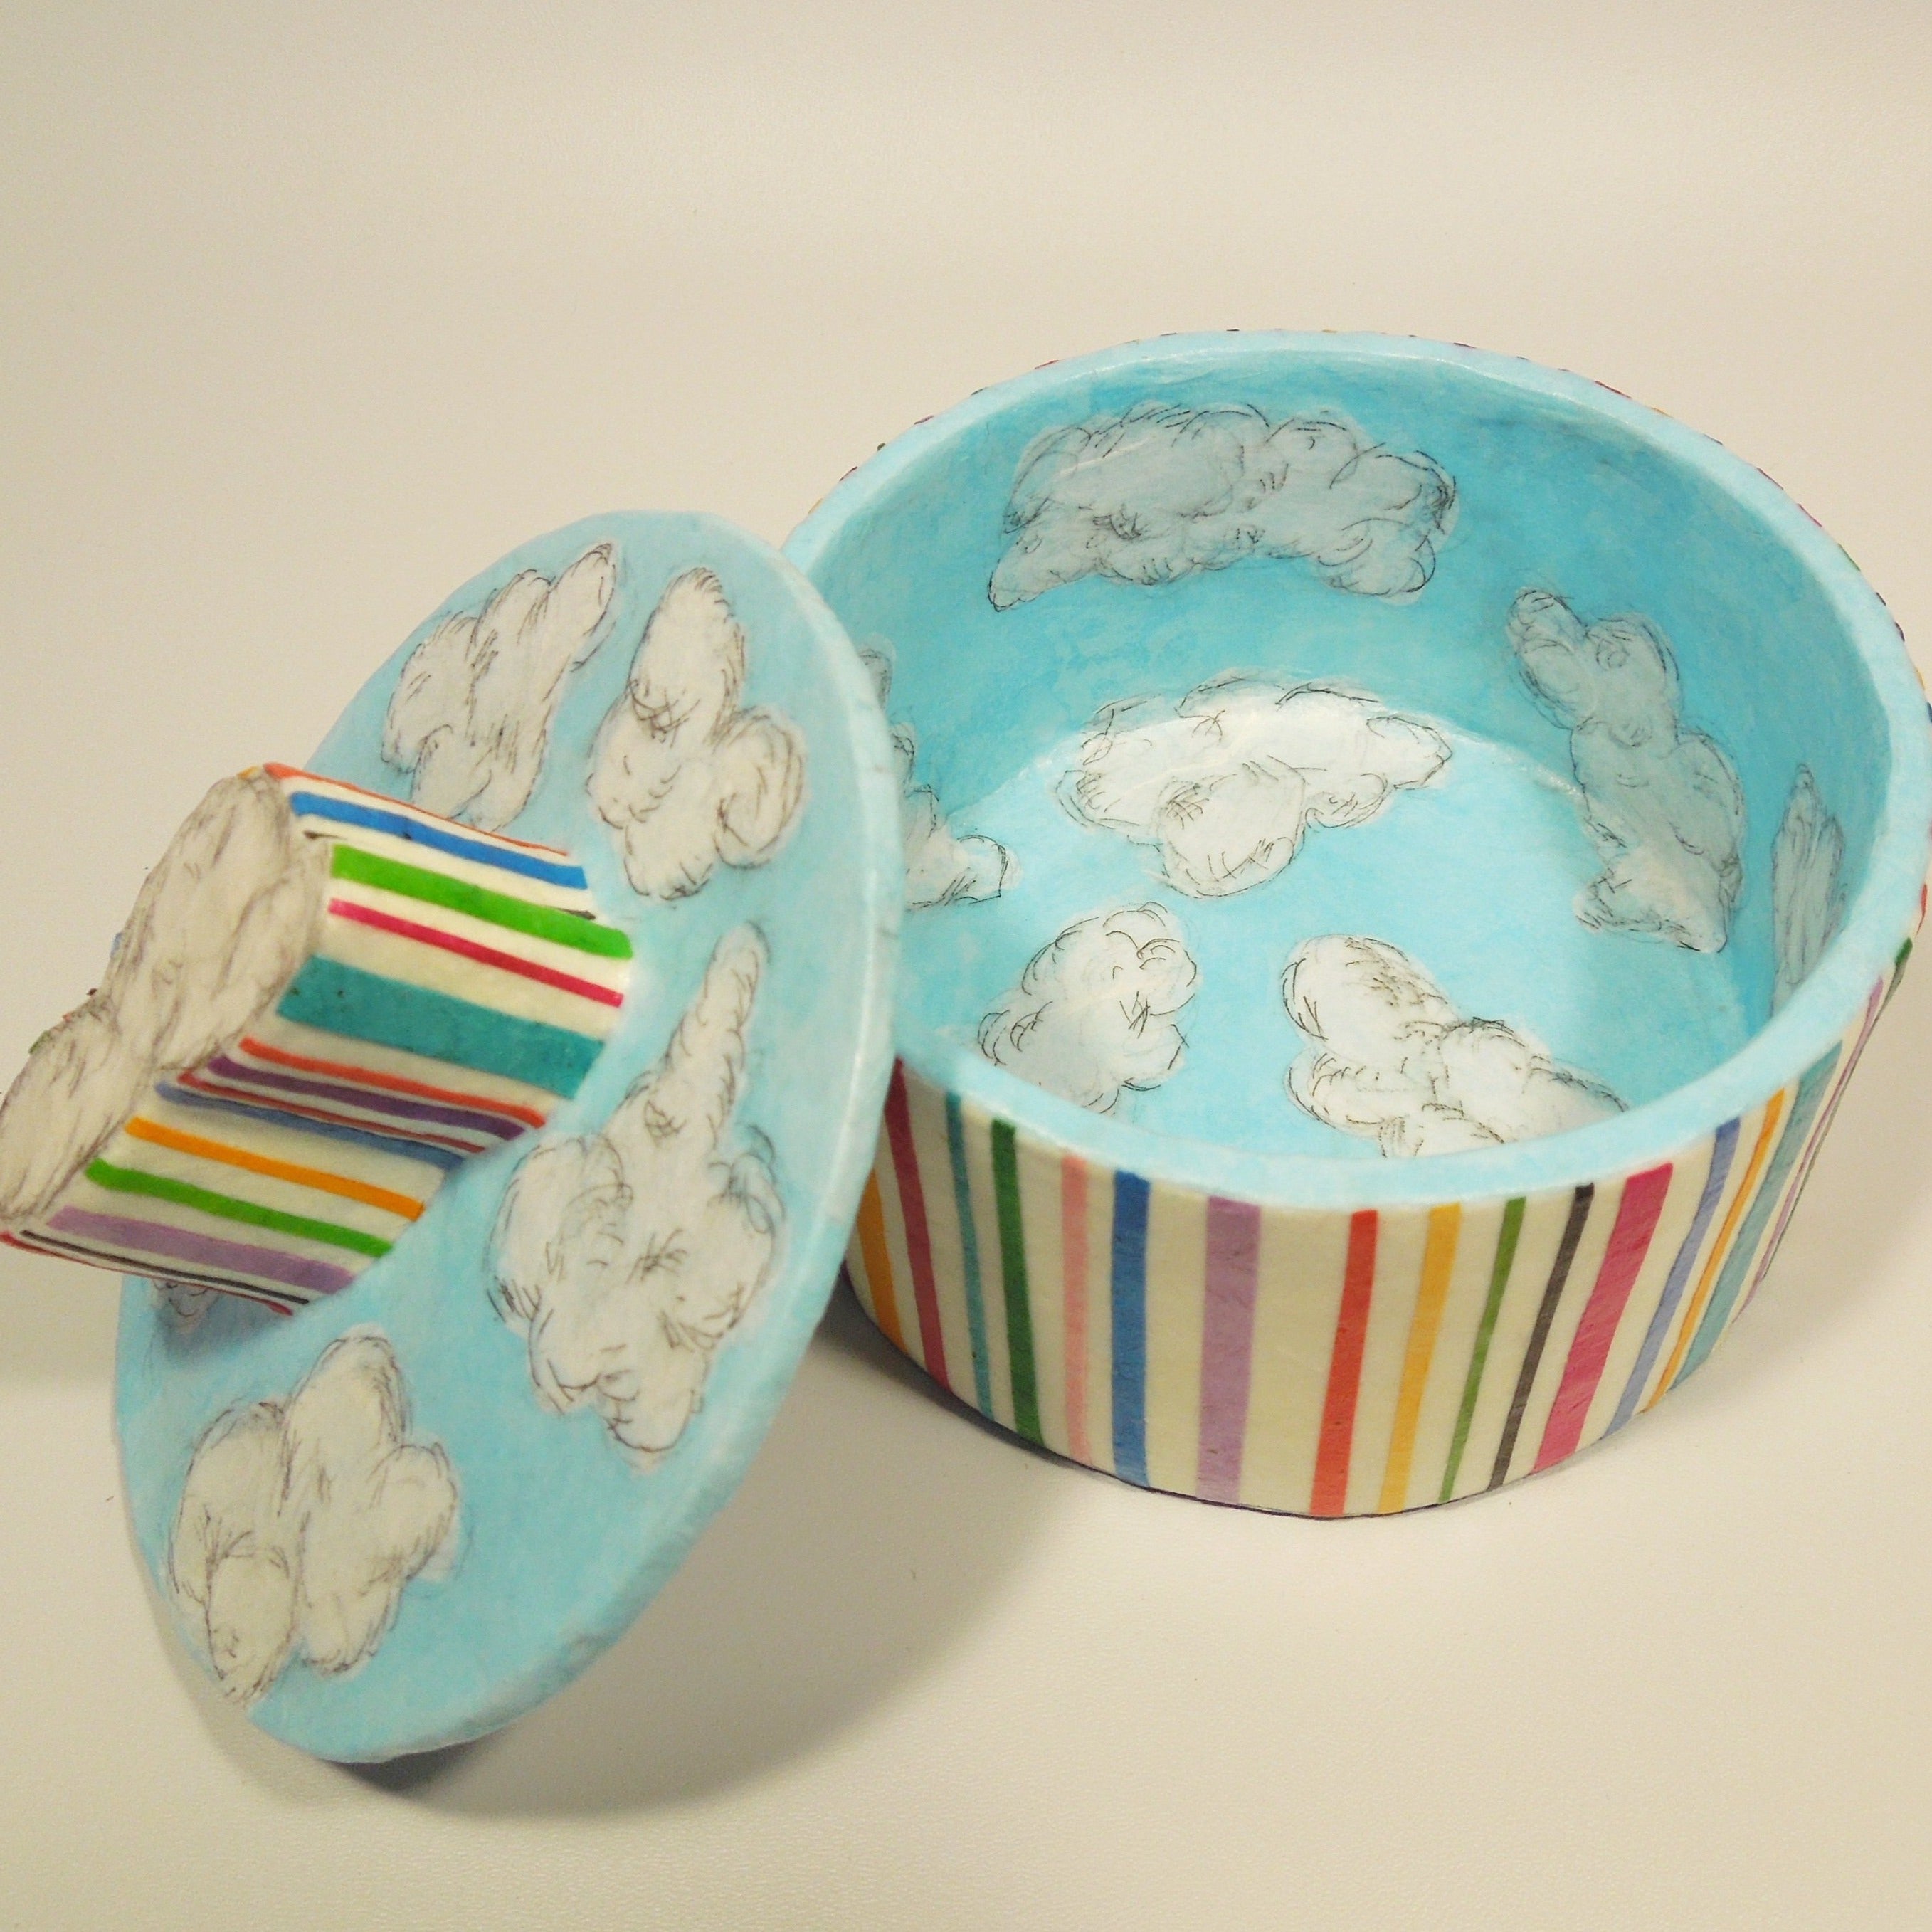 Box Full Of Clouds by Sally Prangley